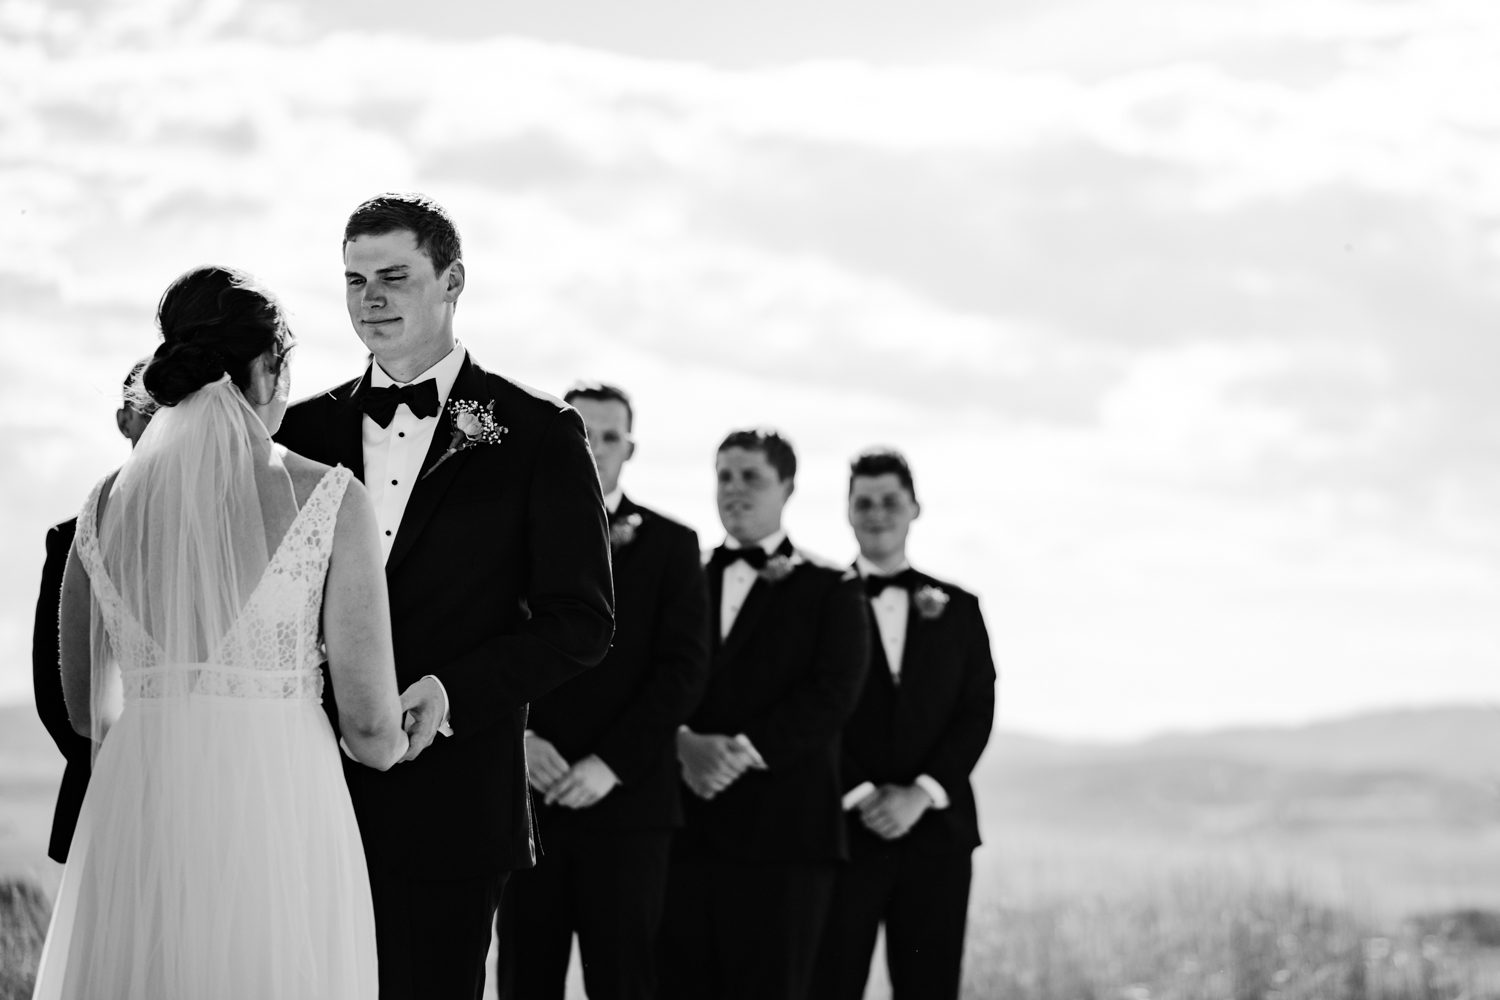 A black and white photo of a wedding ceremony in Steamboat Springs.